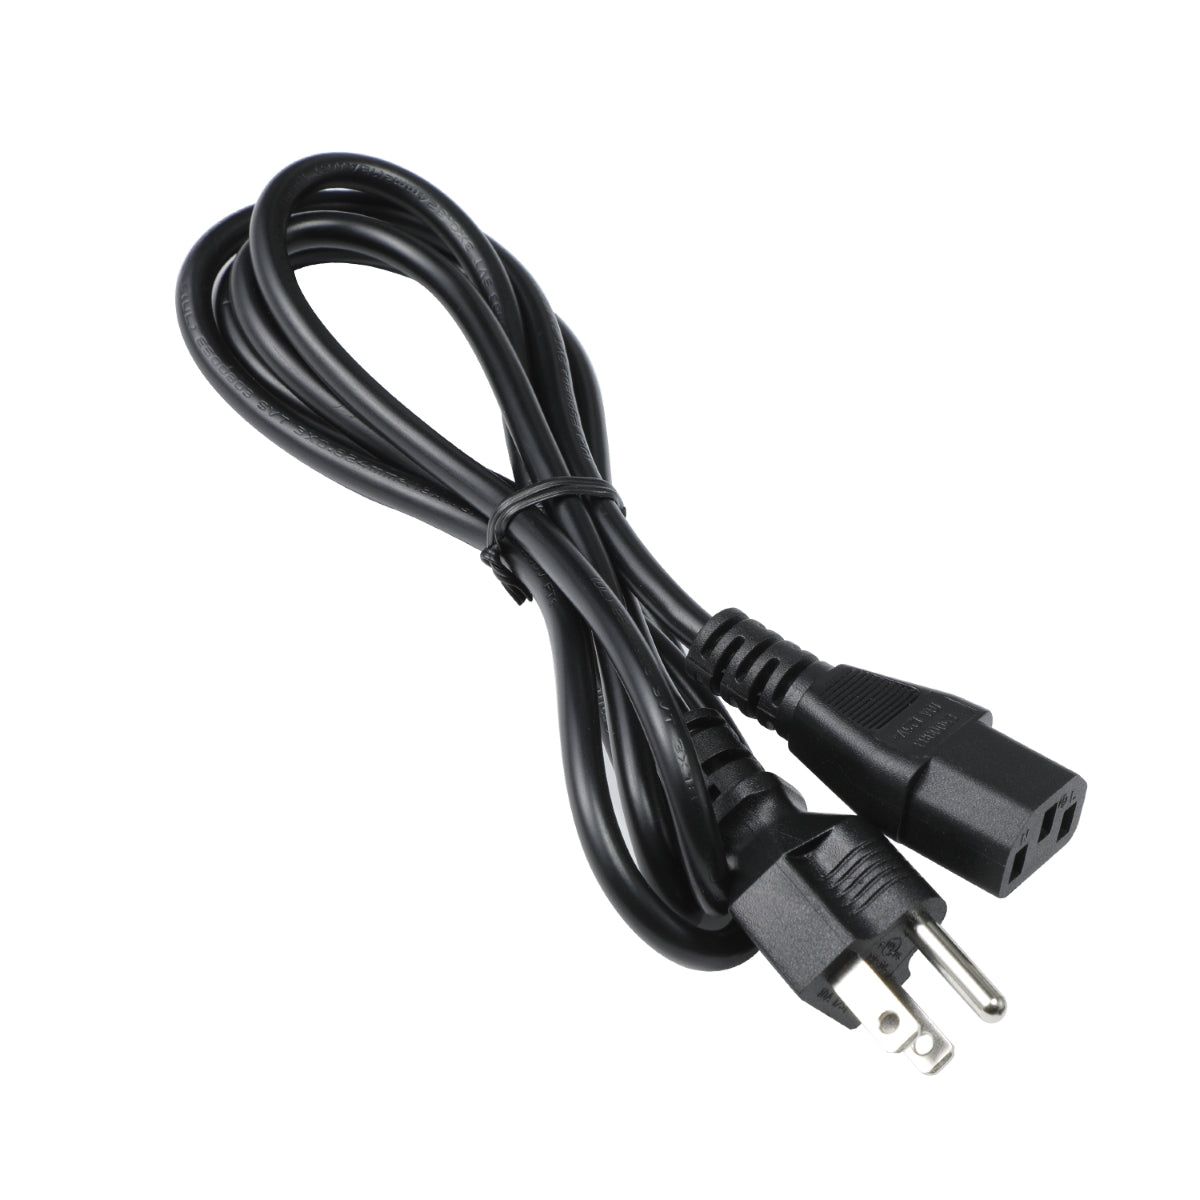 Power Cord for ViewSonic TD2423d Monitor